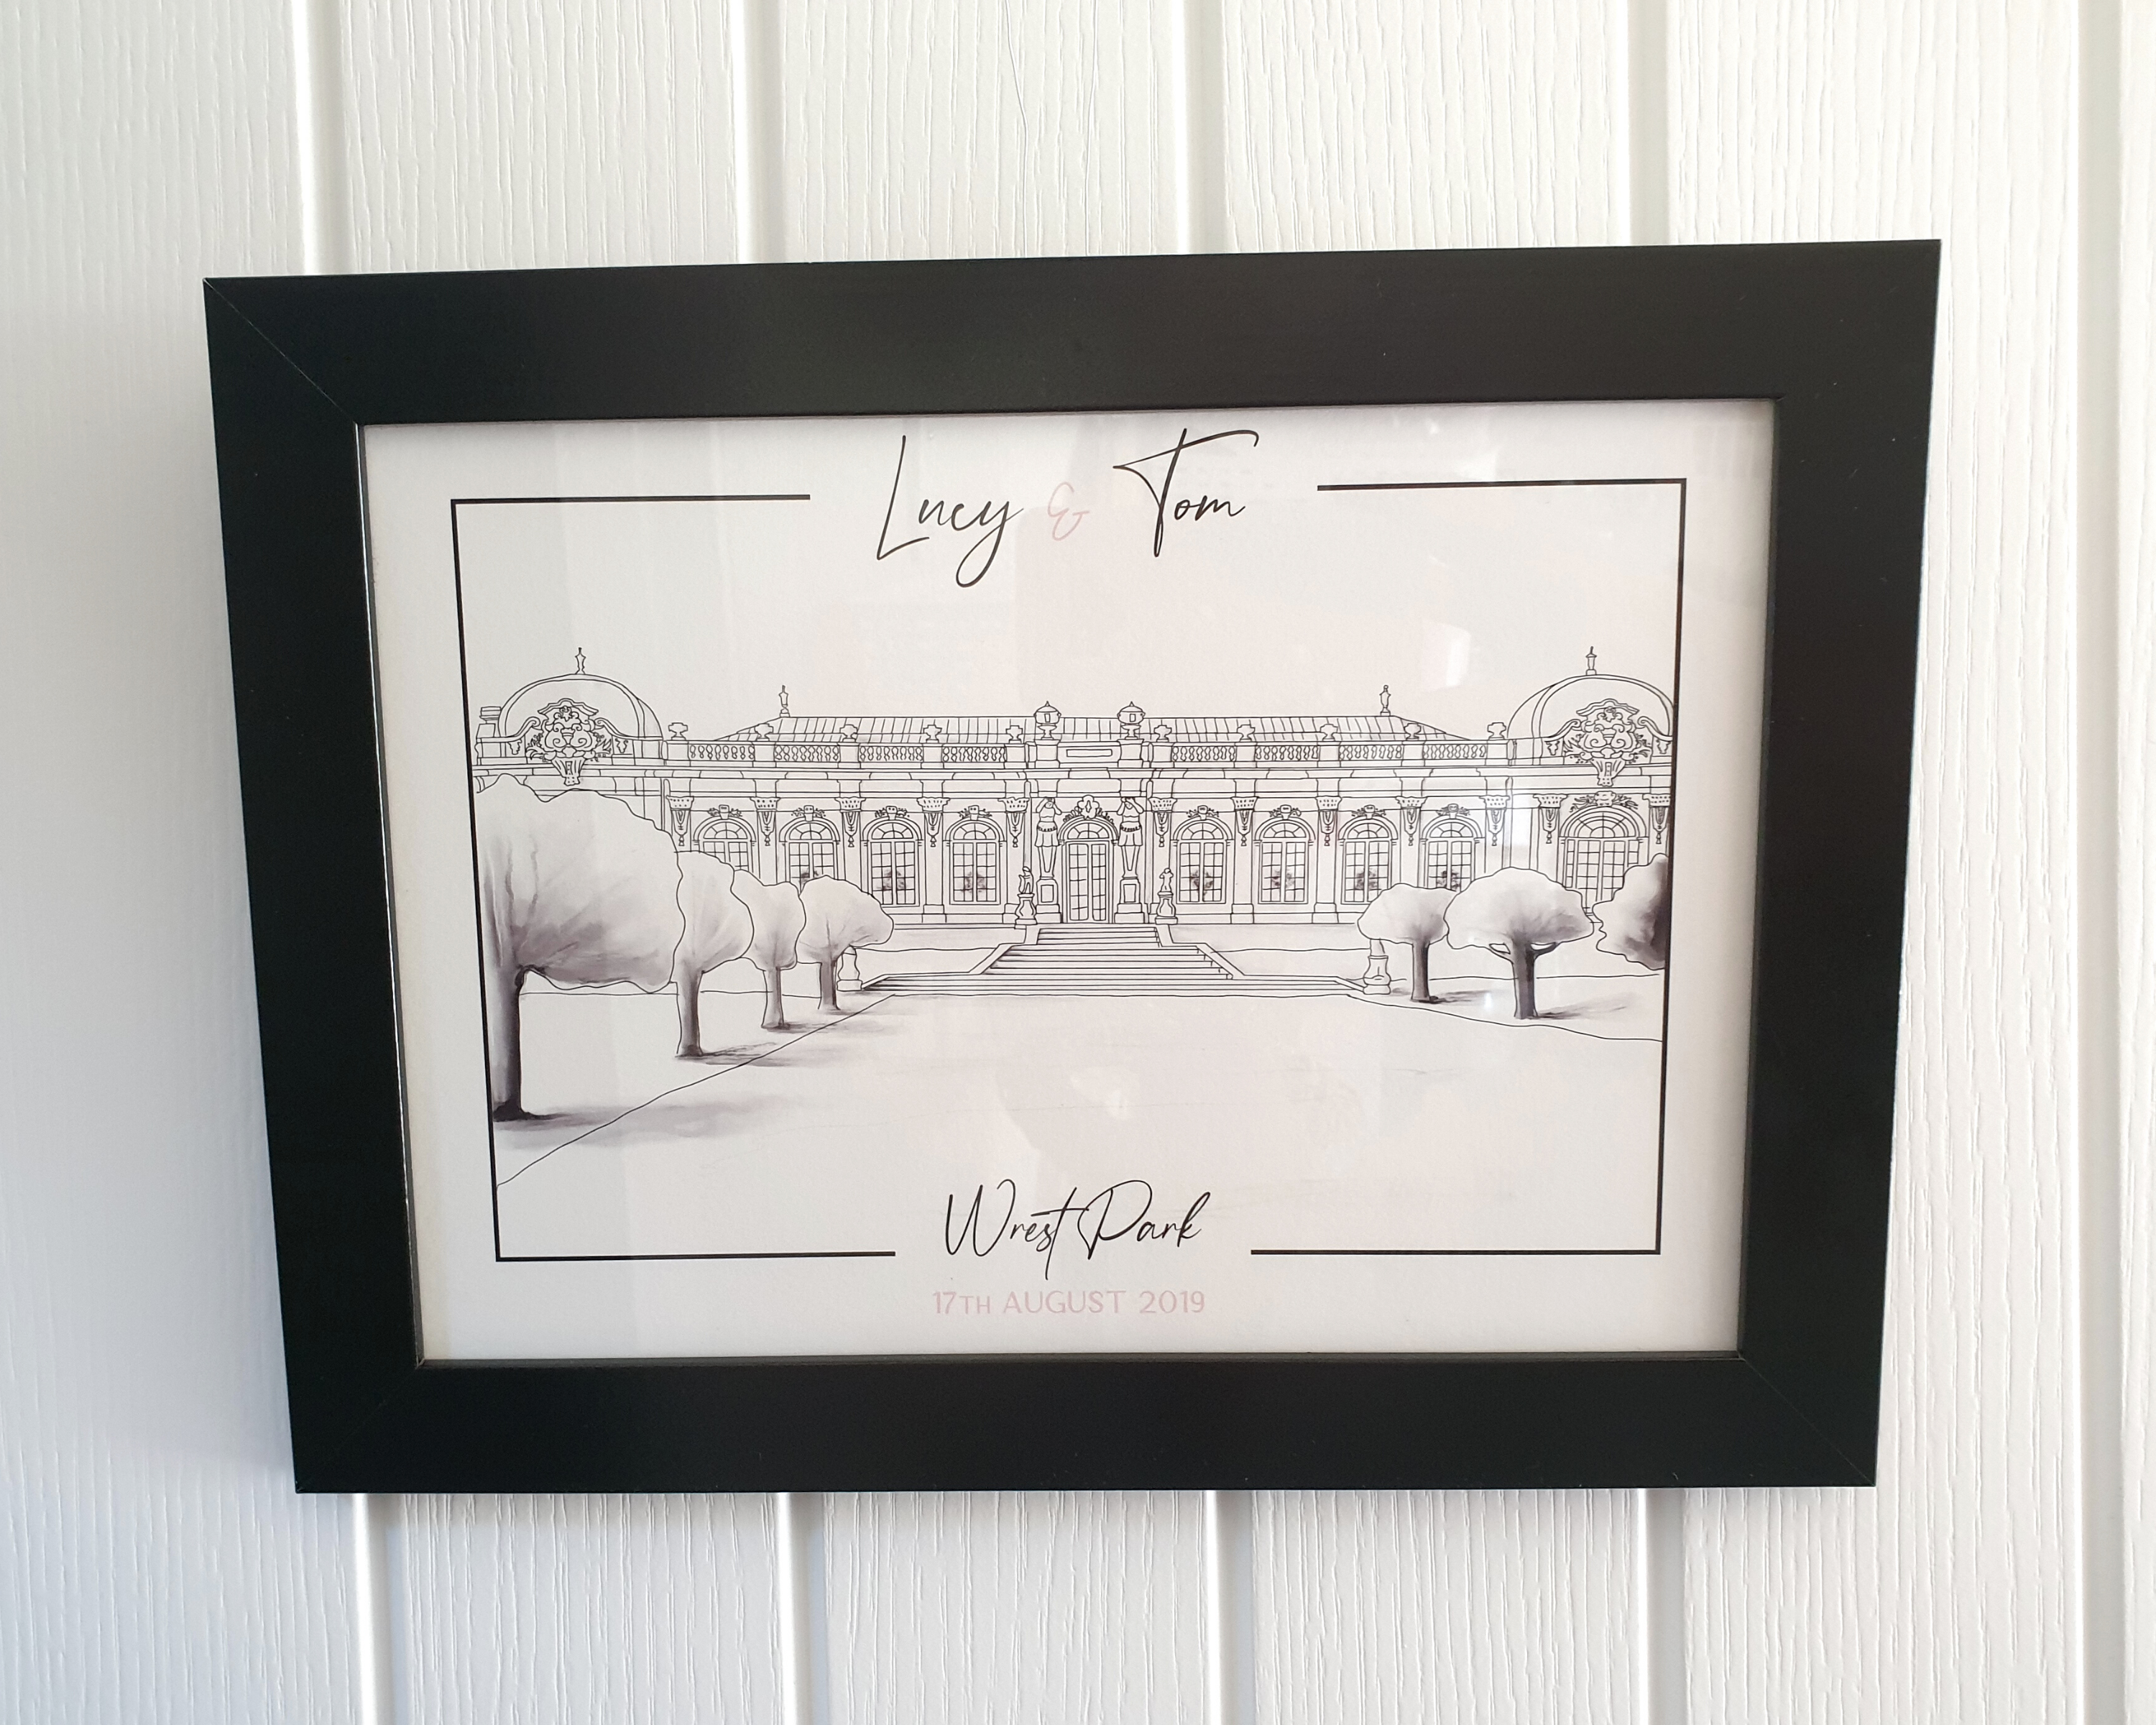 A digitally drawn wedding venue illustration of Wrest Park, with the couple's names at the top, in a black frame.